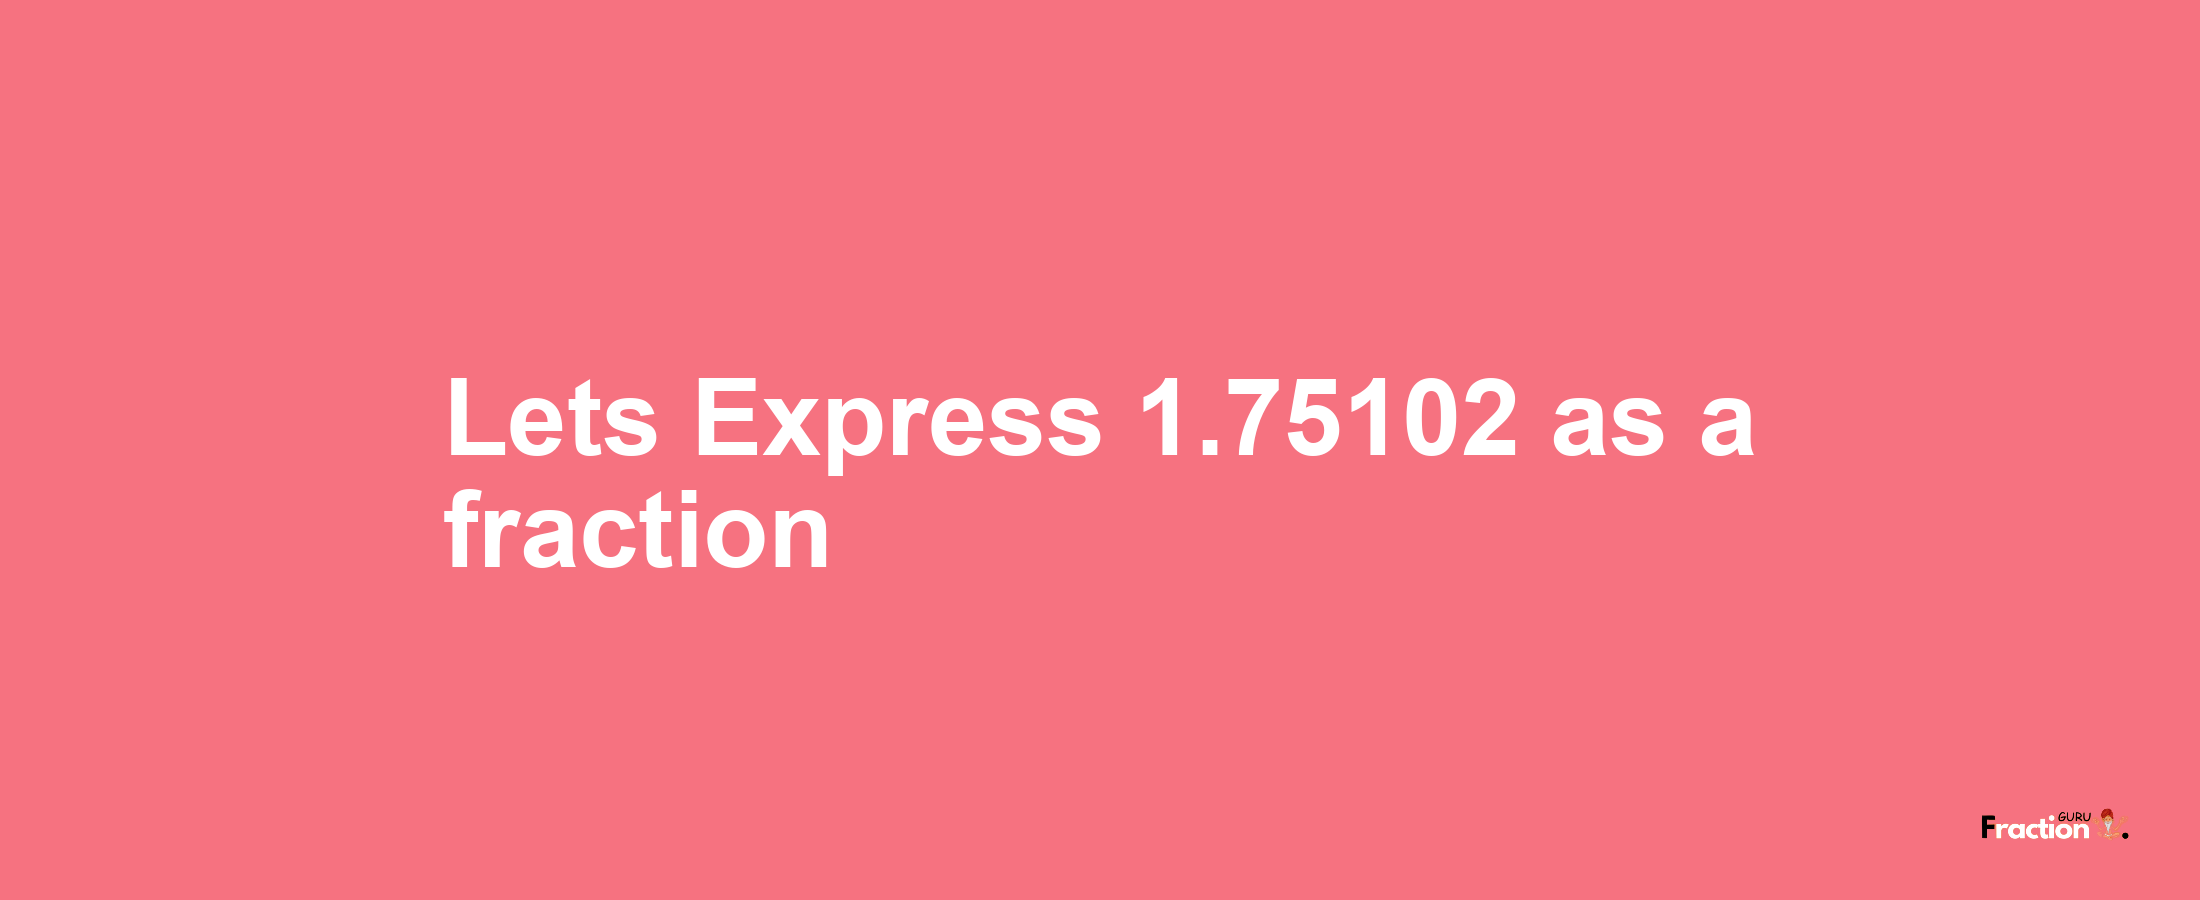 Lets Express 1.75102 as afraction